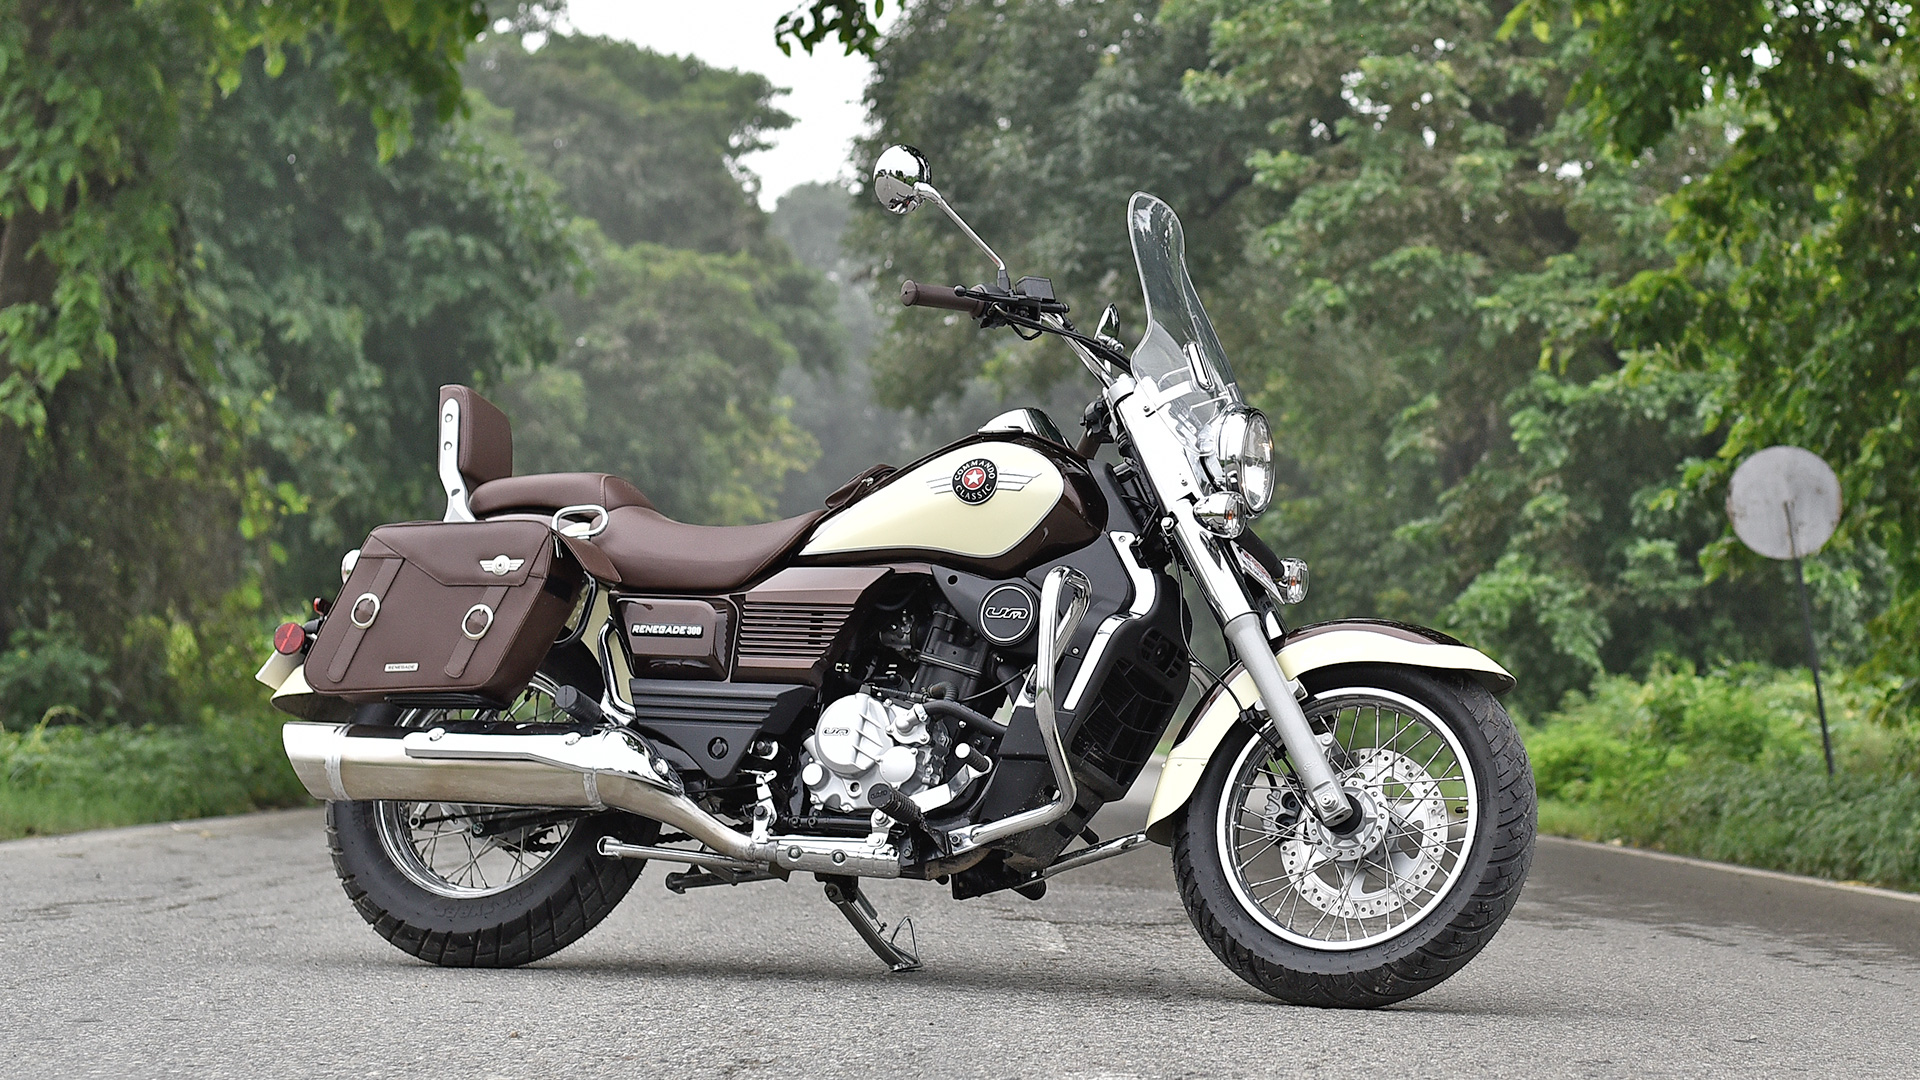 UM Motorcycles Renegade 2017 Classic - Price in India, Mileage, Reviews,  Colours, Specification, Images - Overdrive